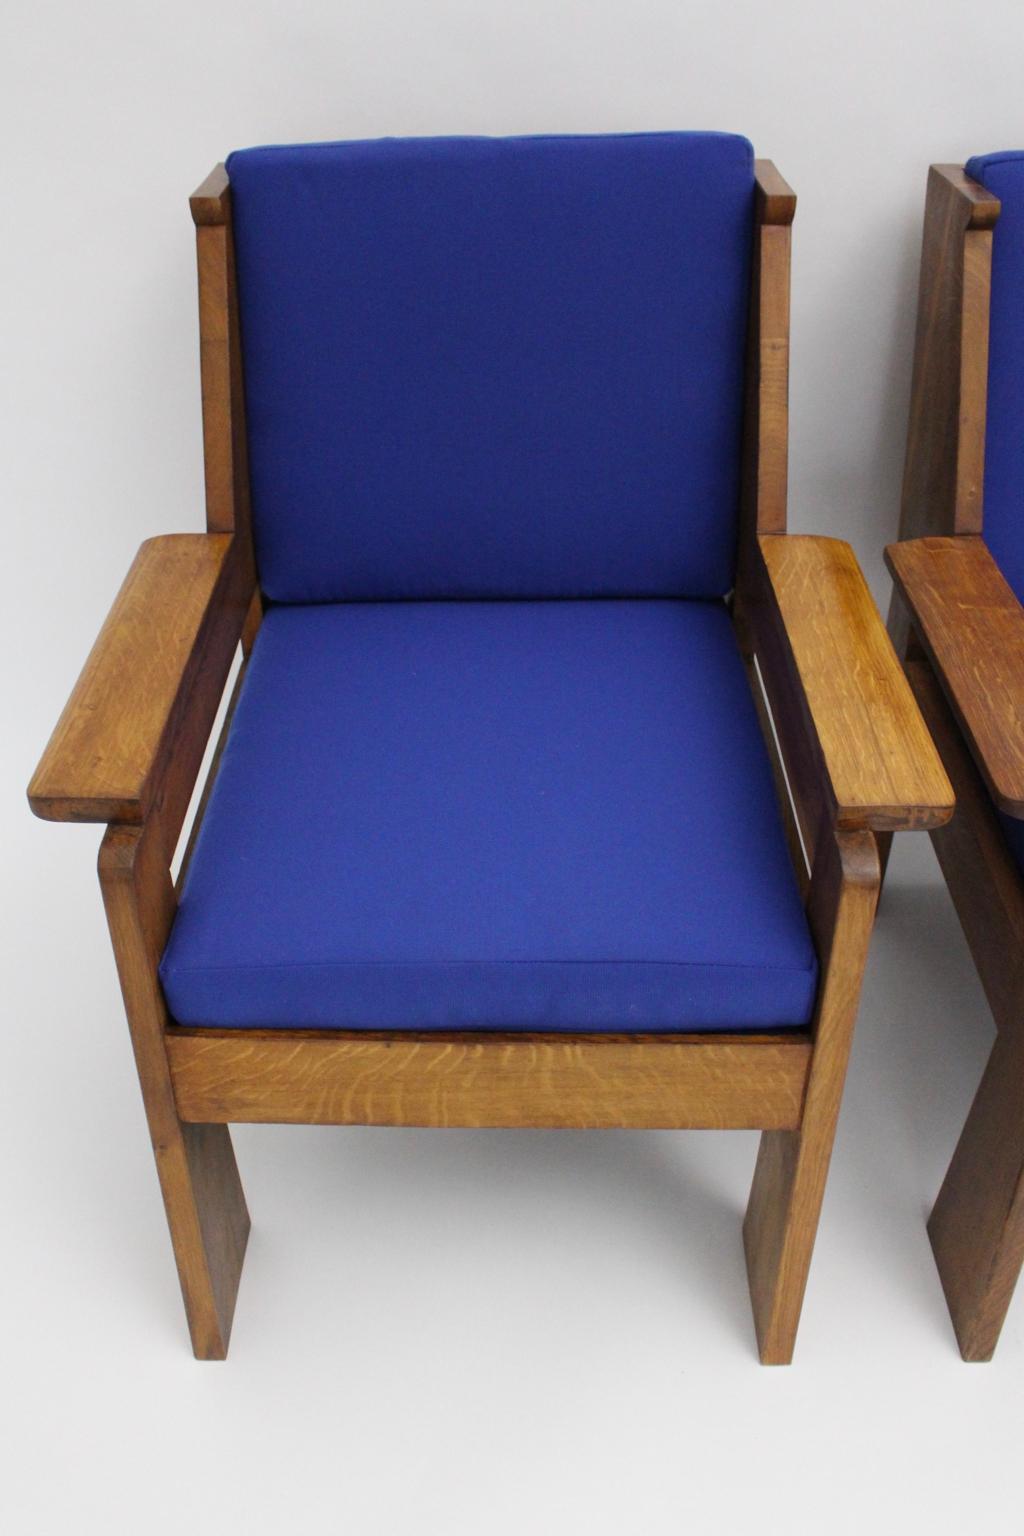 Early 20th Century Art Deco Czech Cubism Oak Wood Blue Fabric Vintage Armchairs Lounge Chairs 1920s For Sale